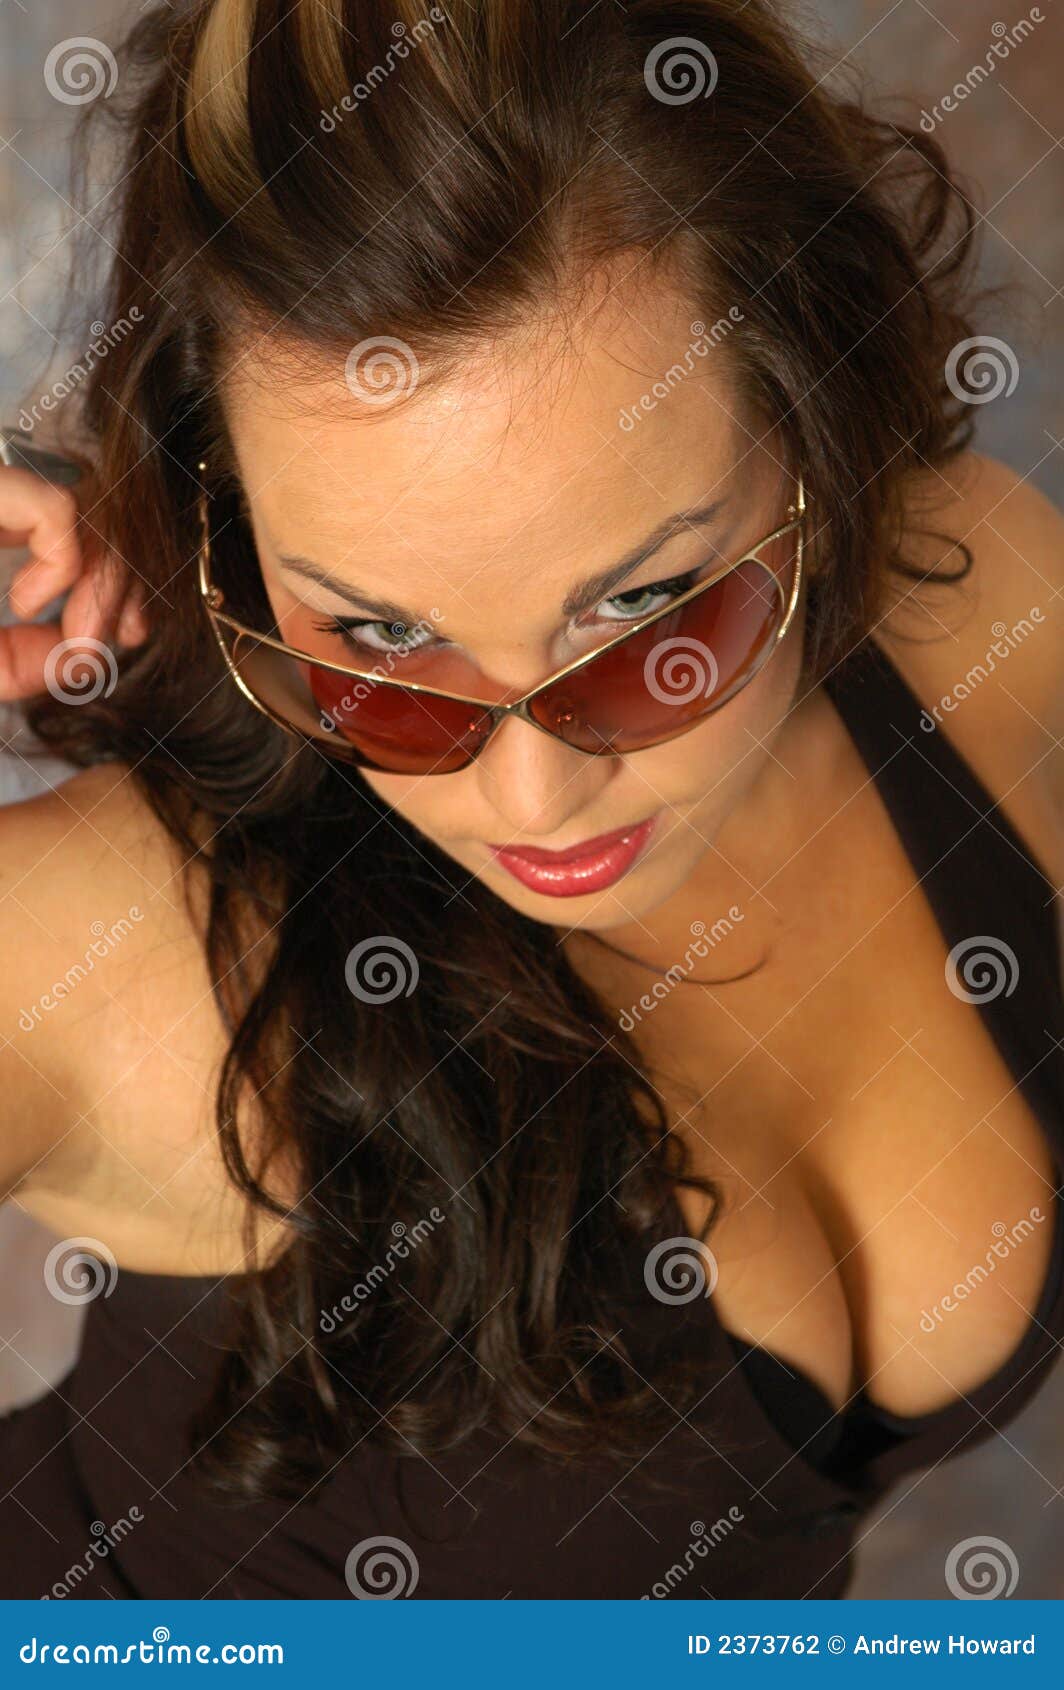 Busty Brunette in Stock Photo - background, 2373762